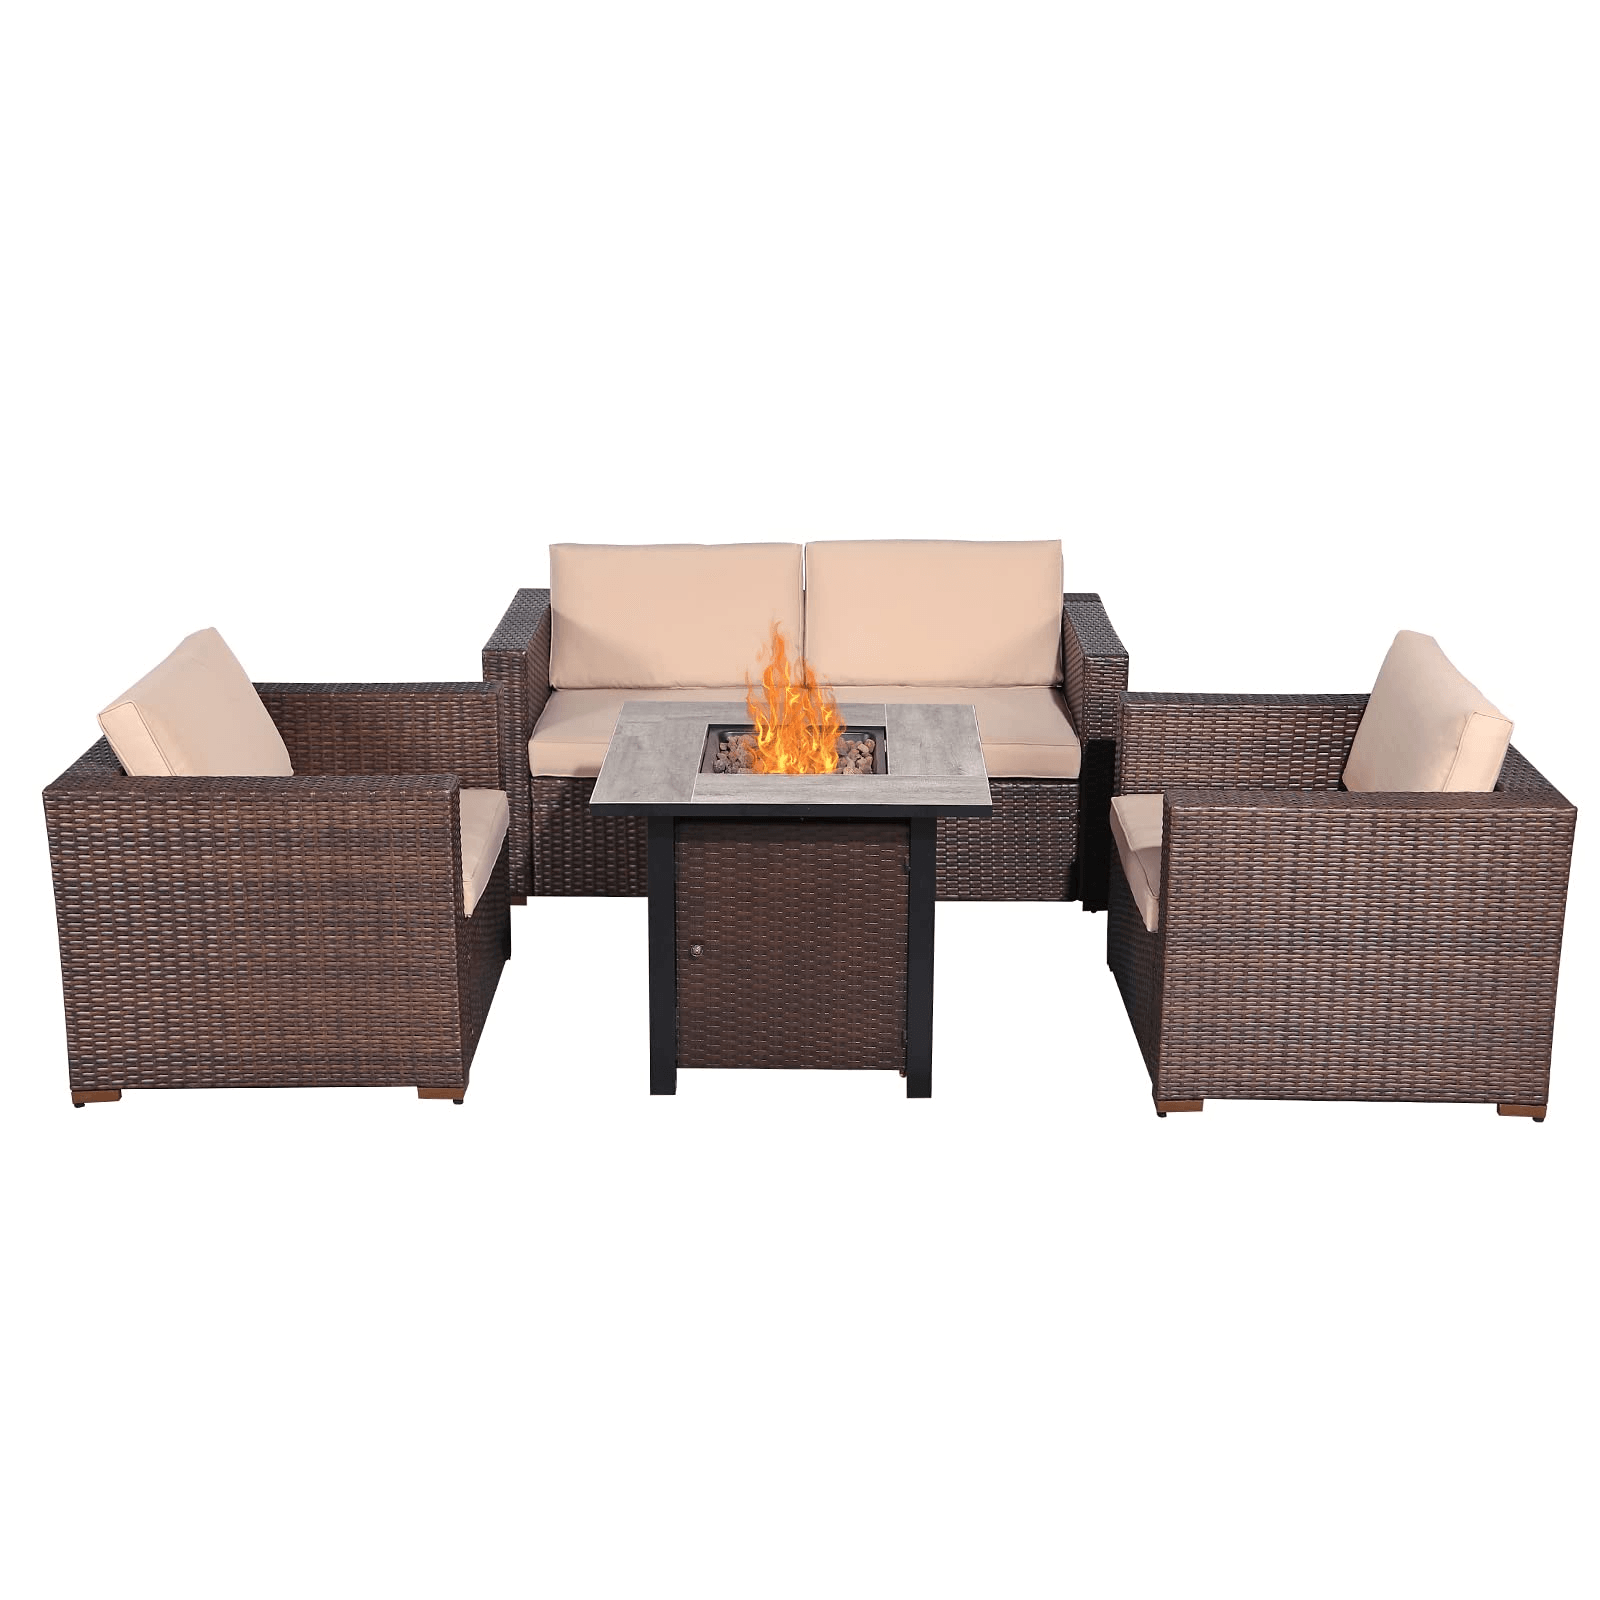 5-pc. Patio Furniture Set with Gas Fire Pit Table best price #color_brown